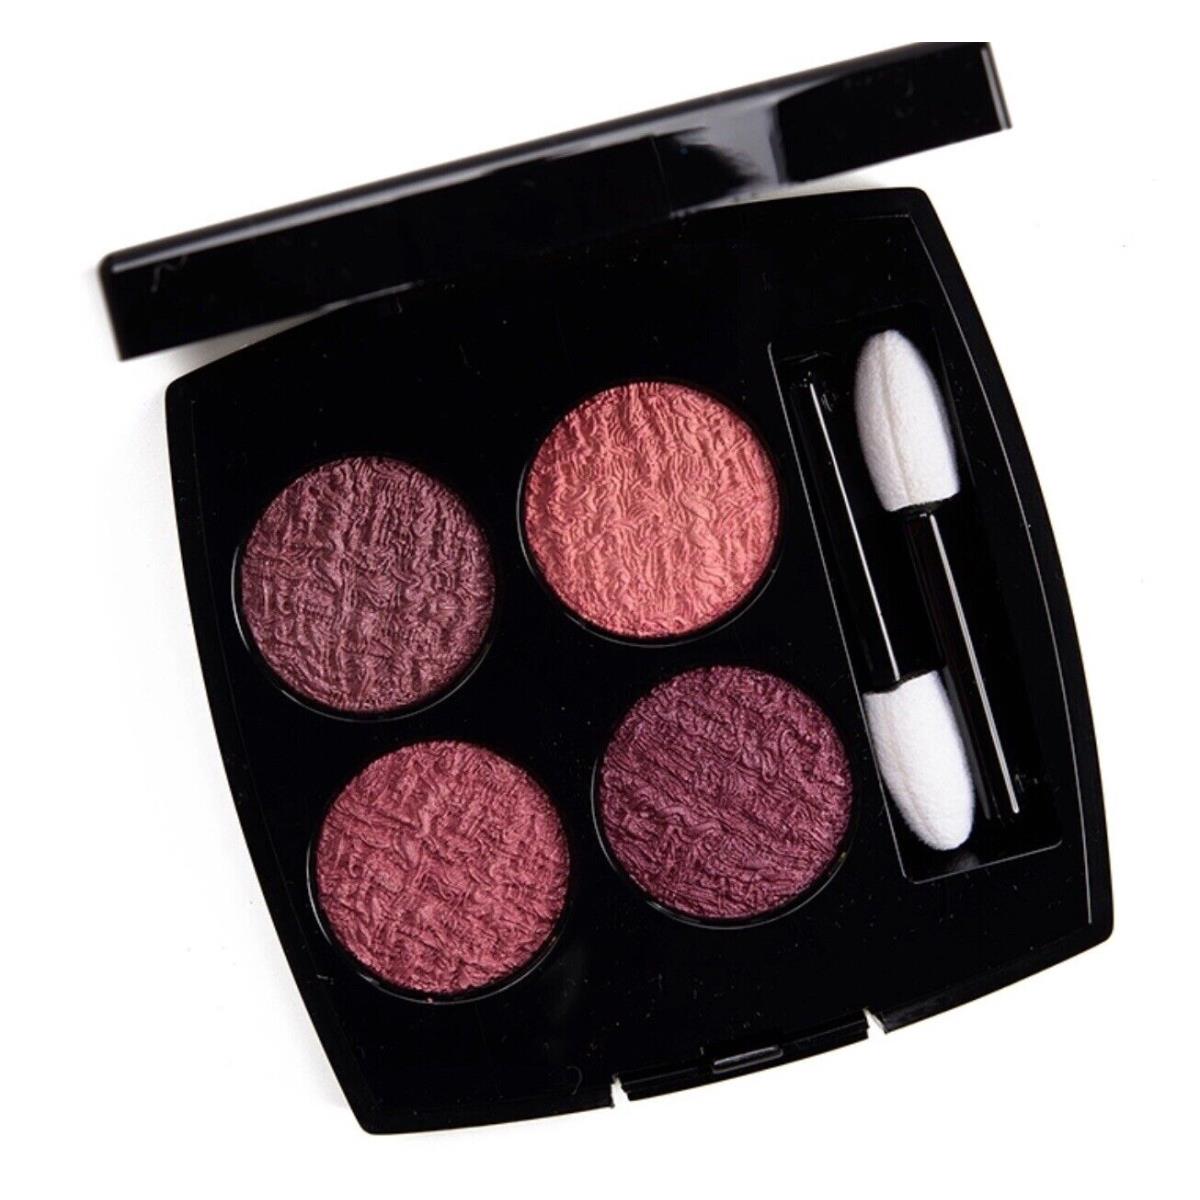 Chanel Limited Tweed Pourpre 02 Les Ombres Quad Eye Shadow Palette